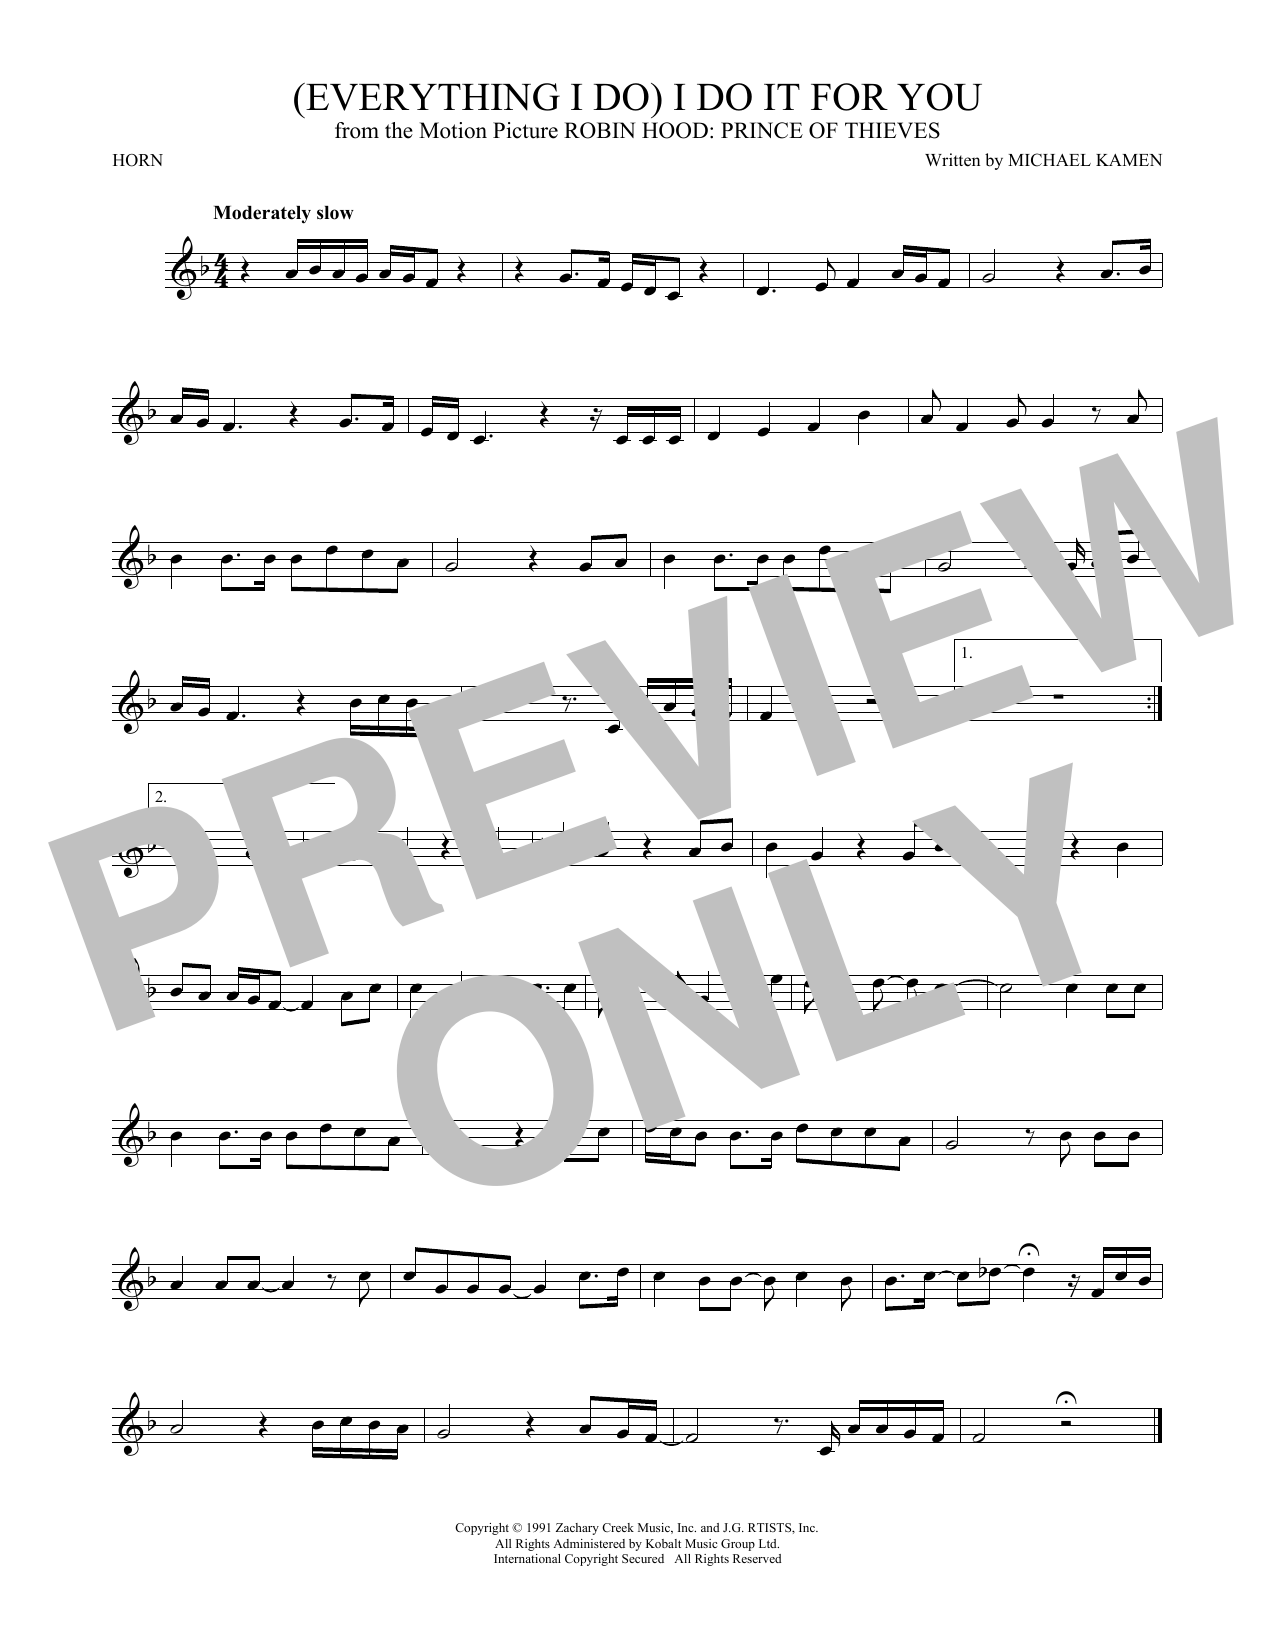 Download Bryan Adams (Everything I Do) I Do It For You Sheet Music